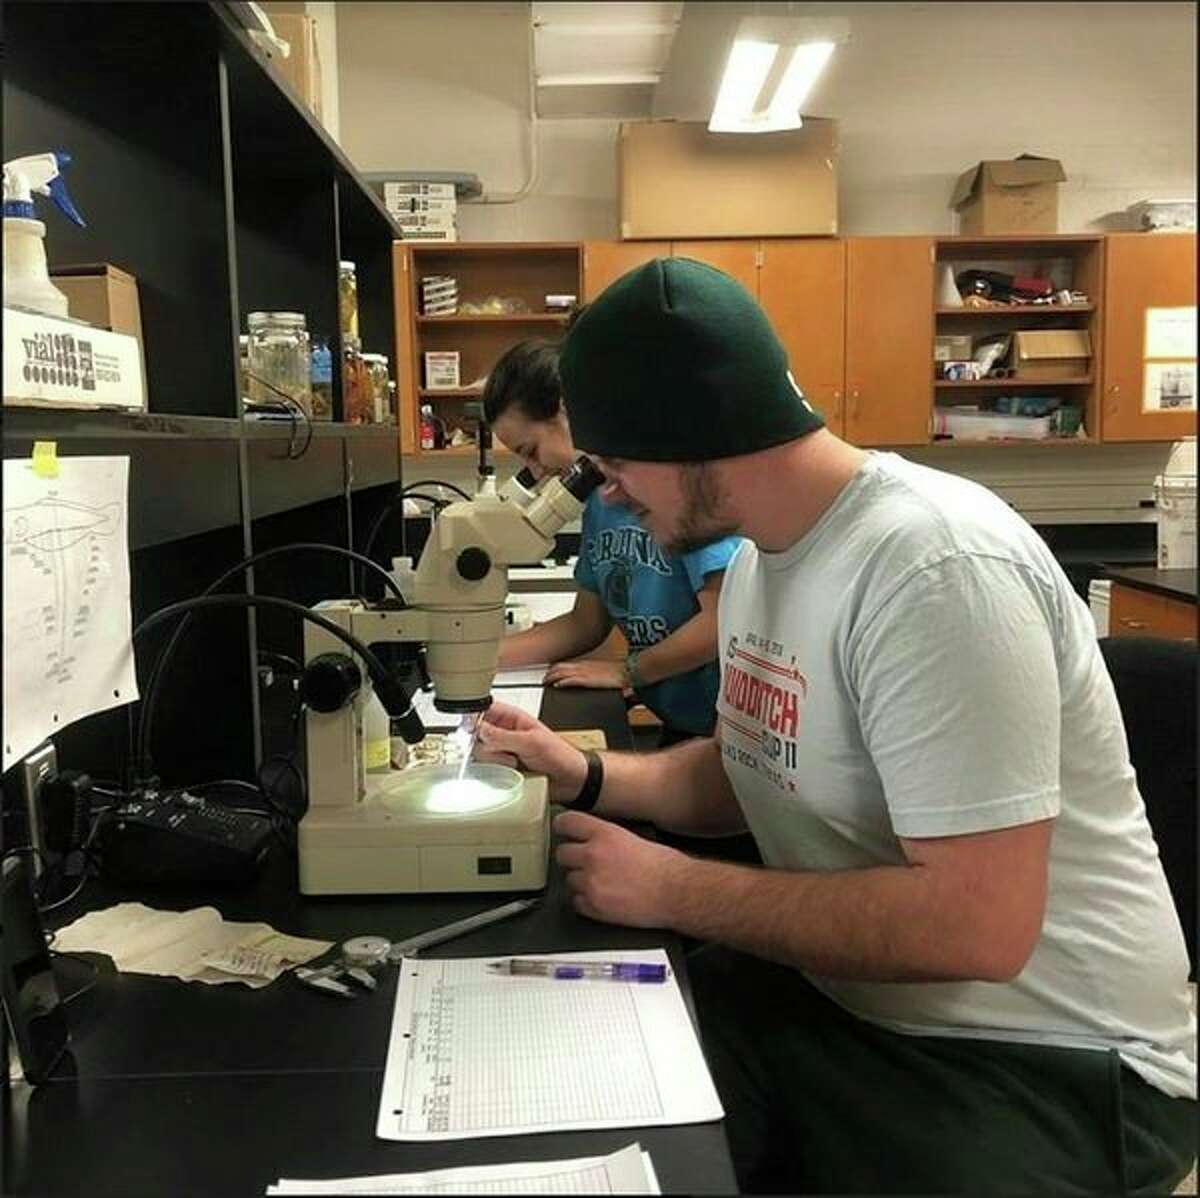 Undergraduate technicians Nick Yeager and Sharon Carpenter analyze smaller contents from fish guts in the lab. (Courtesy photo/Katie Kierczynski/Department of Fisheries and Wildlife/Michigan State University)